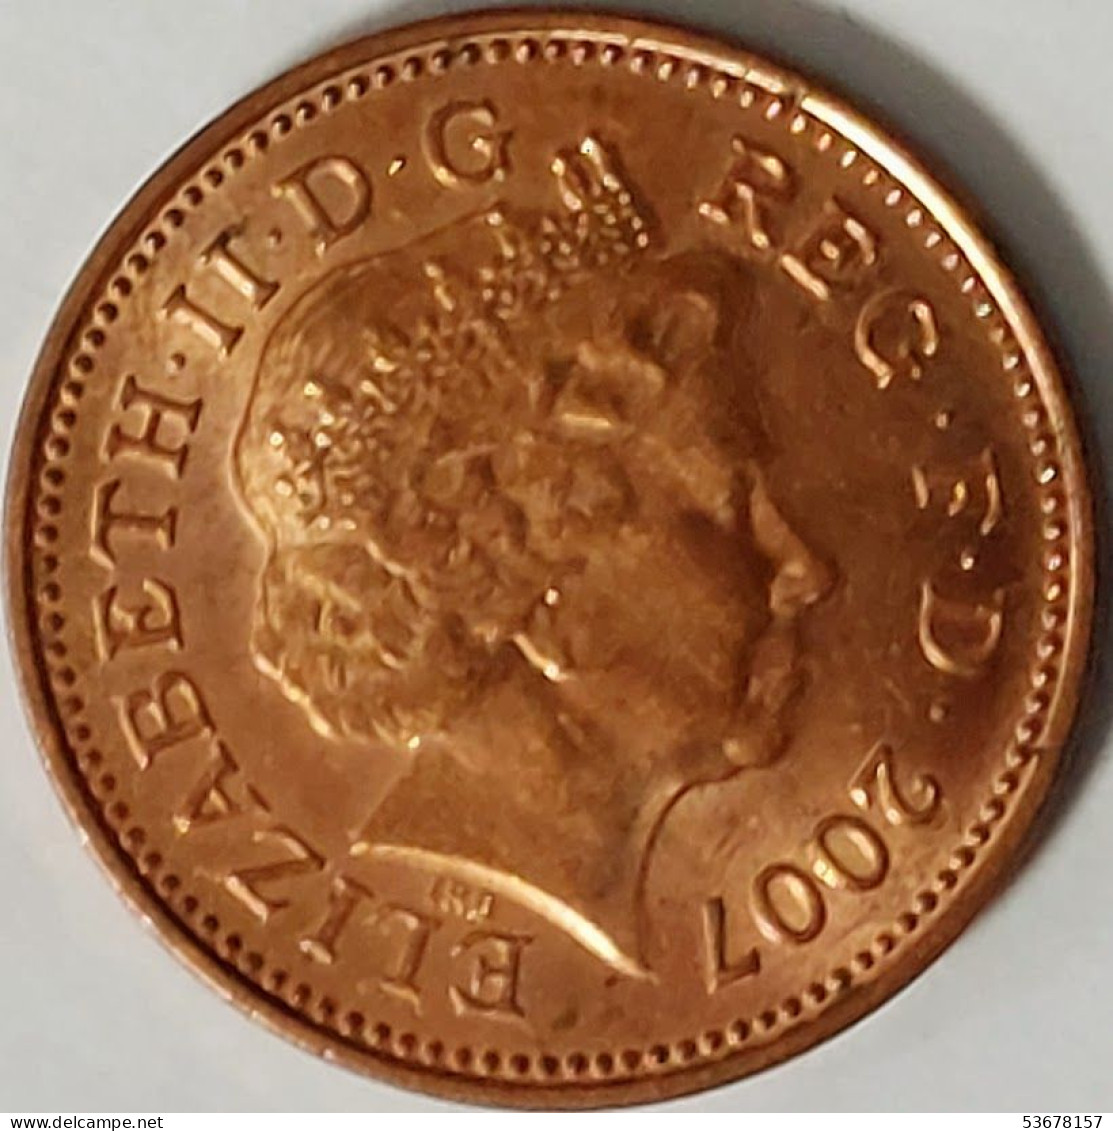 Great Britain - Penny 2007, KM# 986 (#2309) - 1 Penny & 1 New Penny